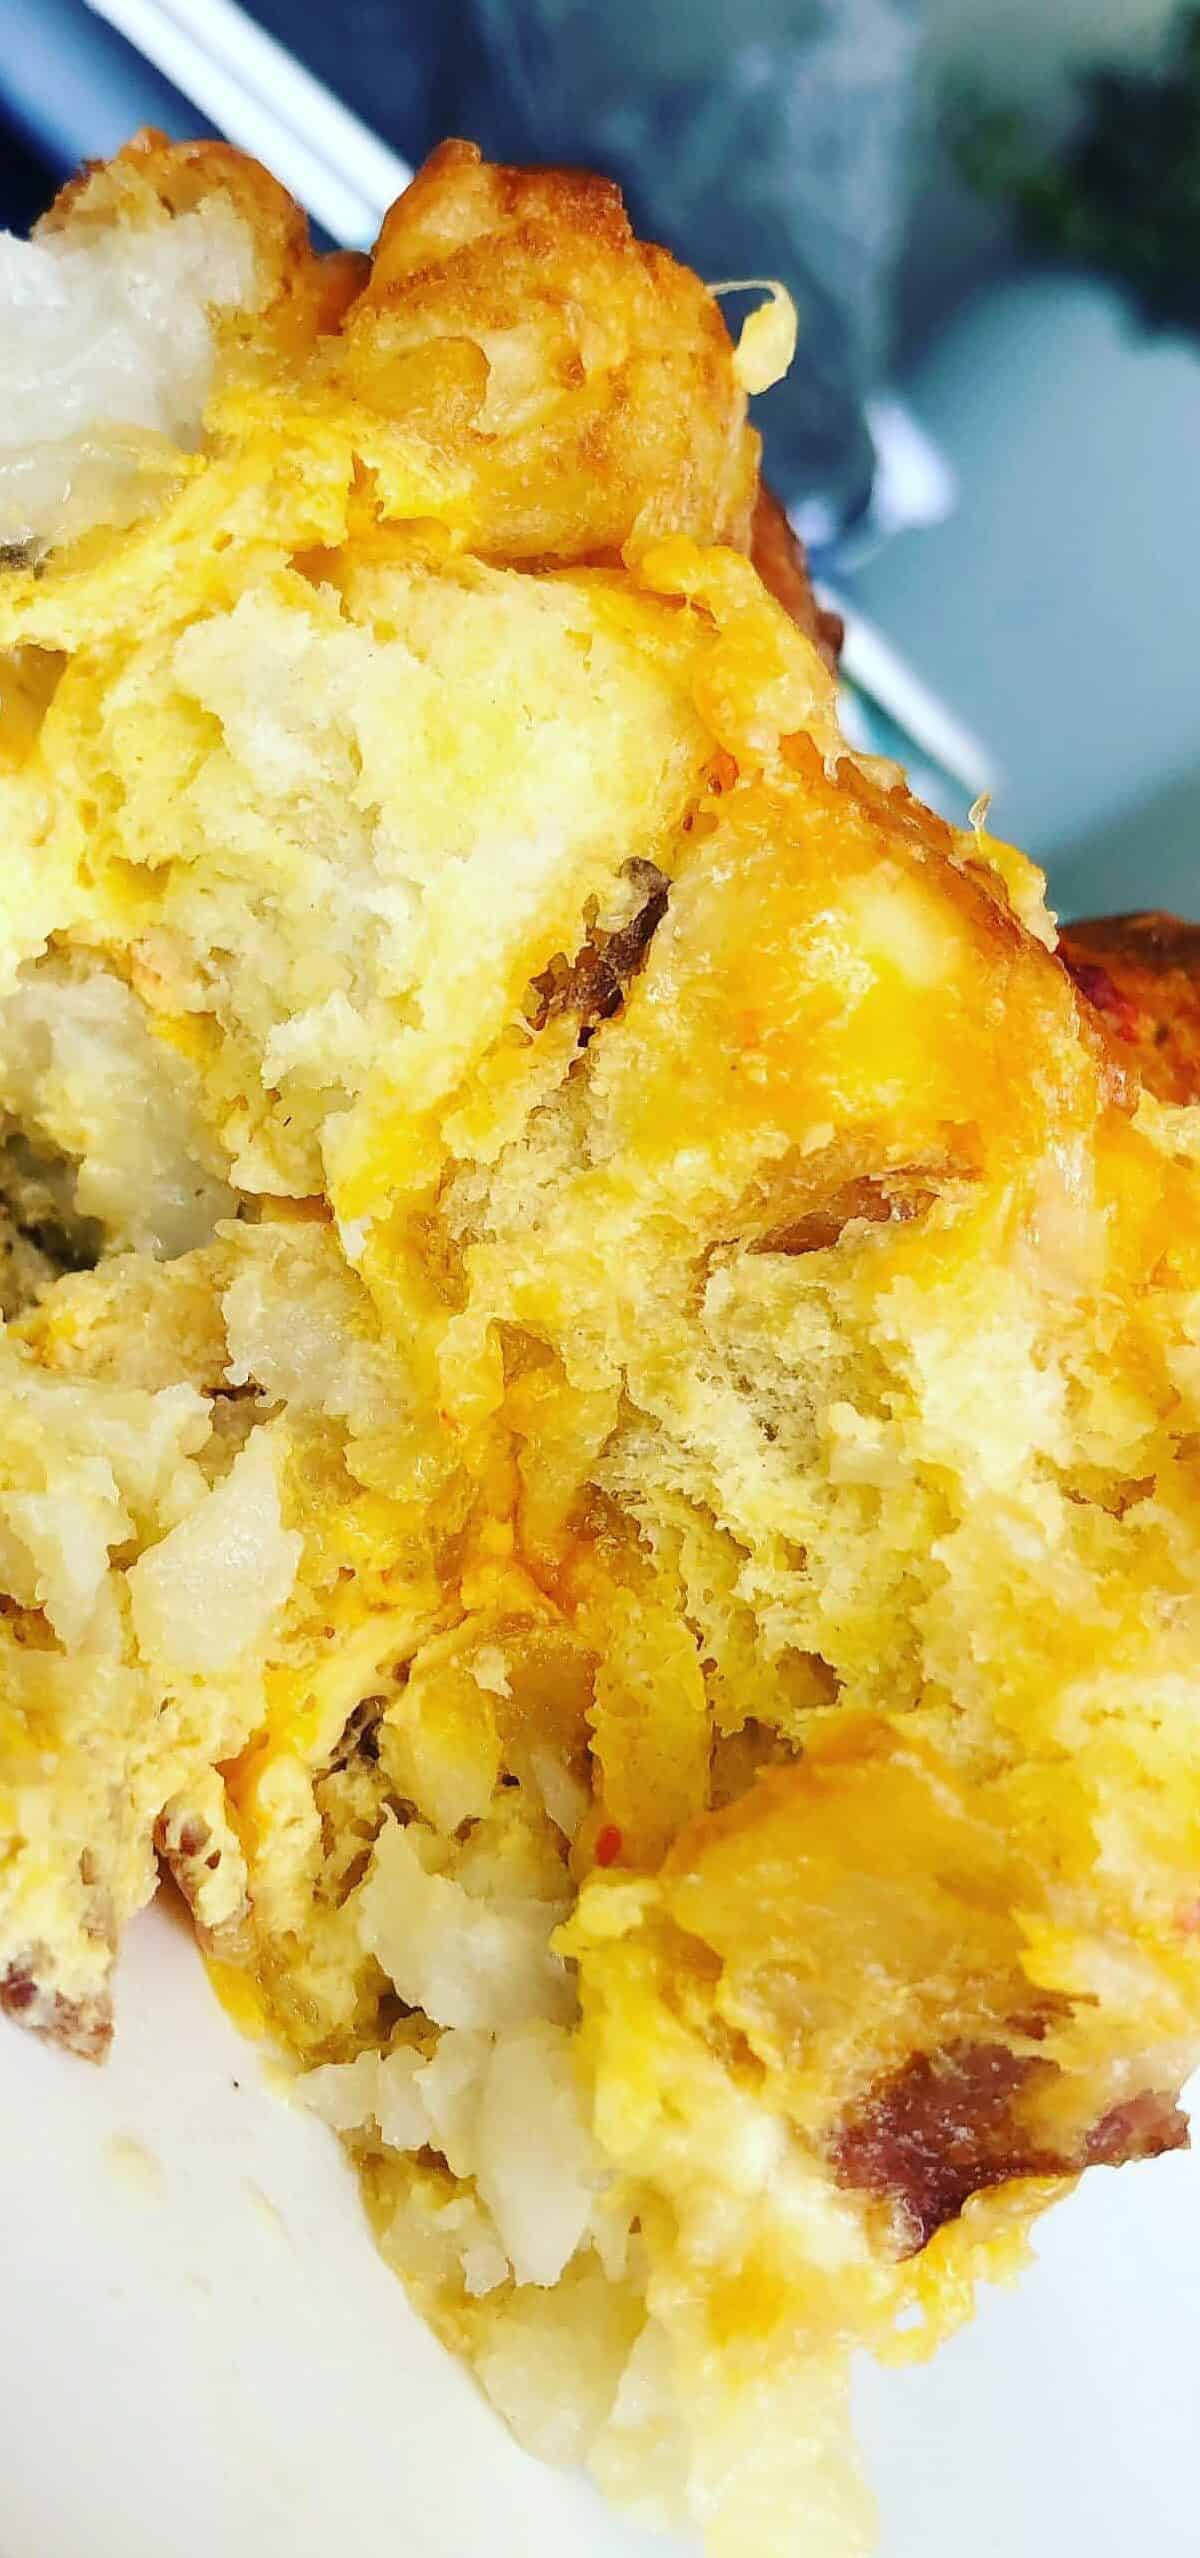  Each bite of this soft and cheesy bread is like a warm hug.